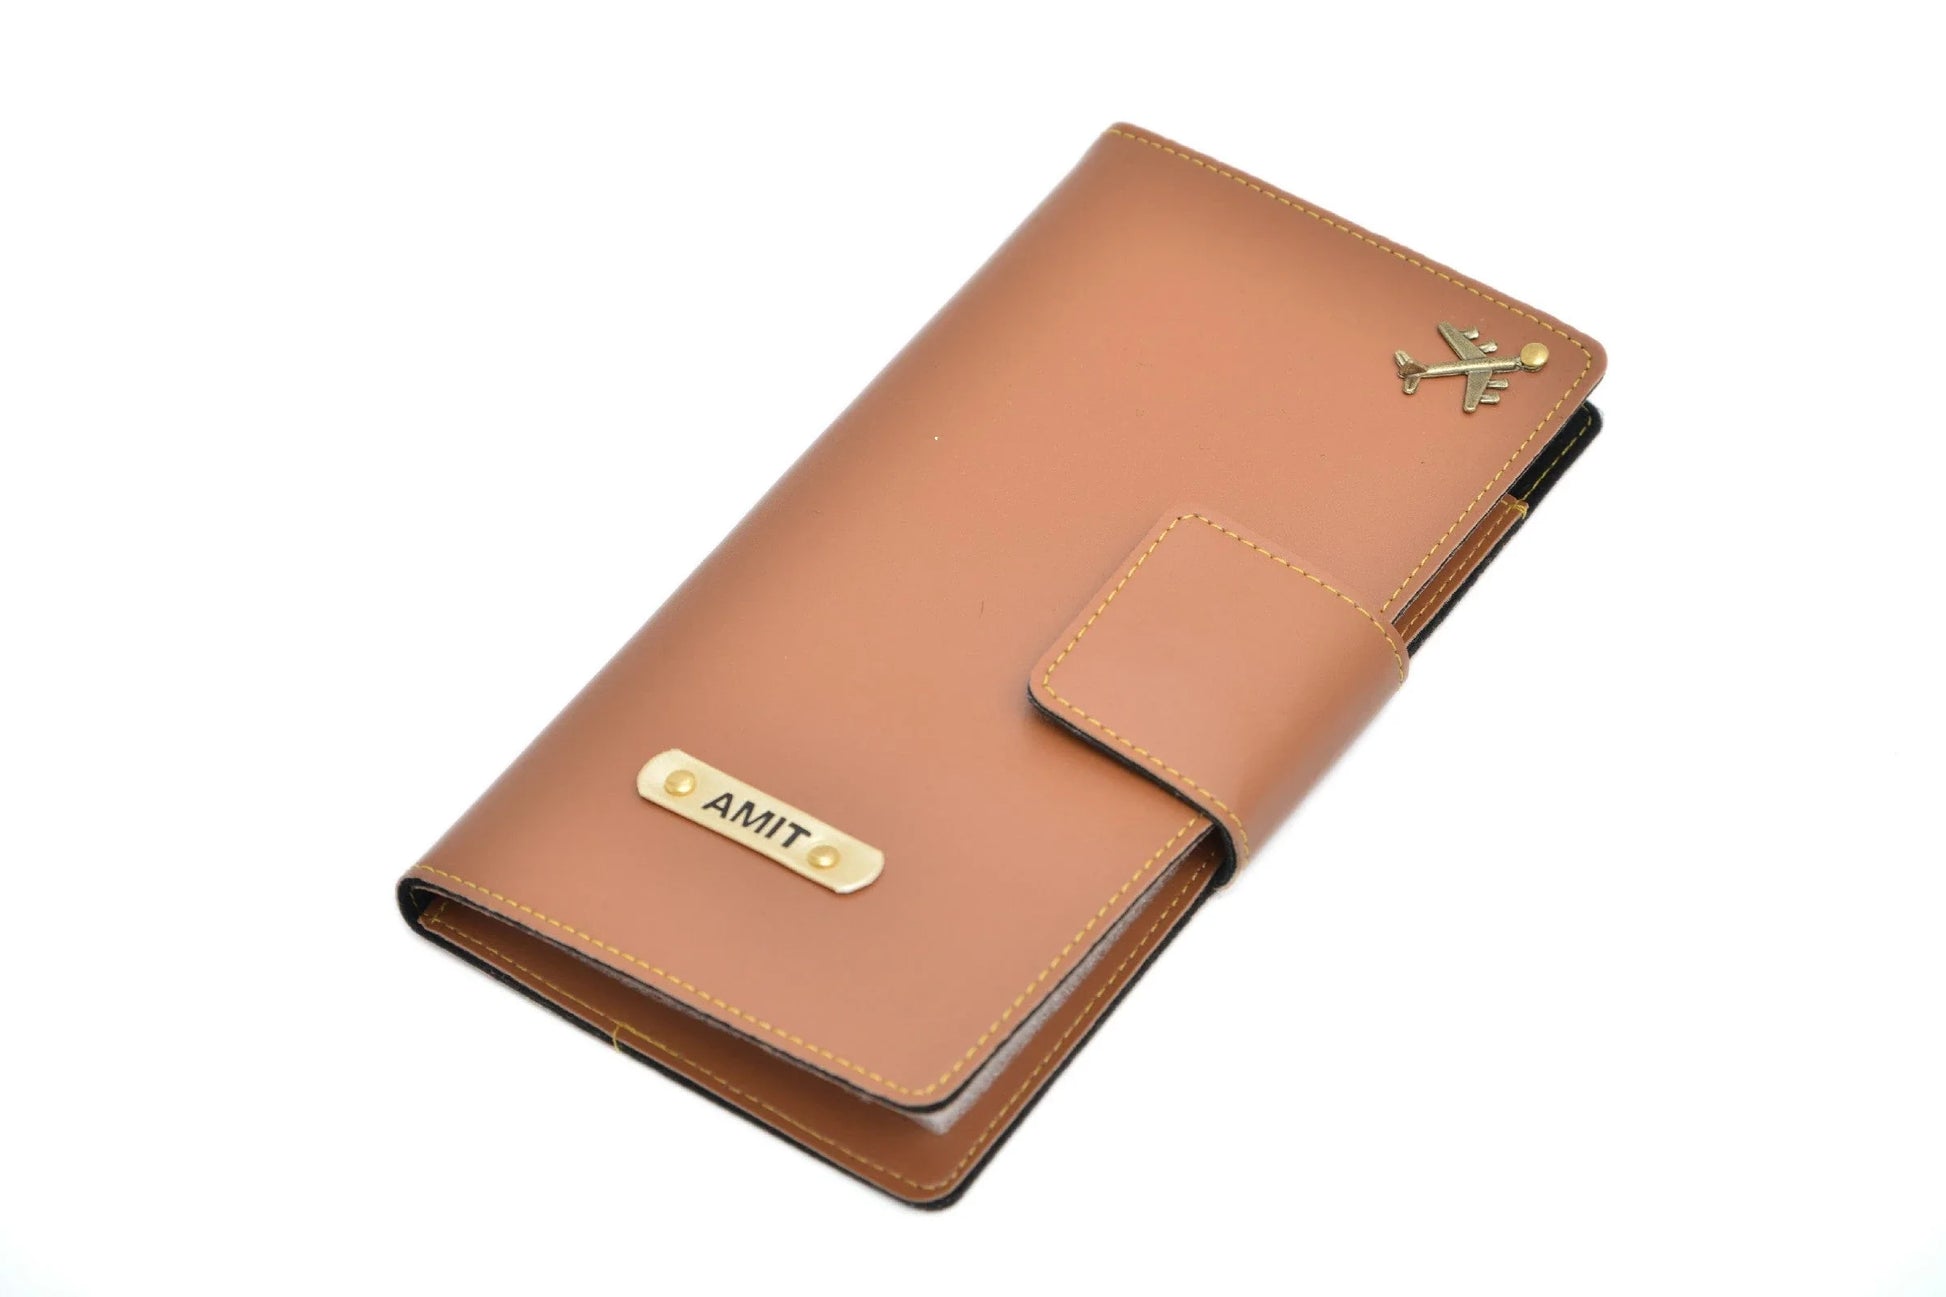 personalized-travel-wallet-tan-customized-best-gift-for-boyfriend-girlfriend. The case with its sturdy build ensures protection of your passport during traveling shenanigans! It carries your passport, money, cards etc. at one place. Material-vegan/synthetic leather